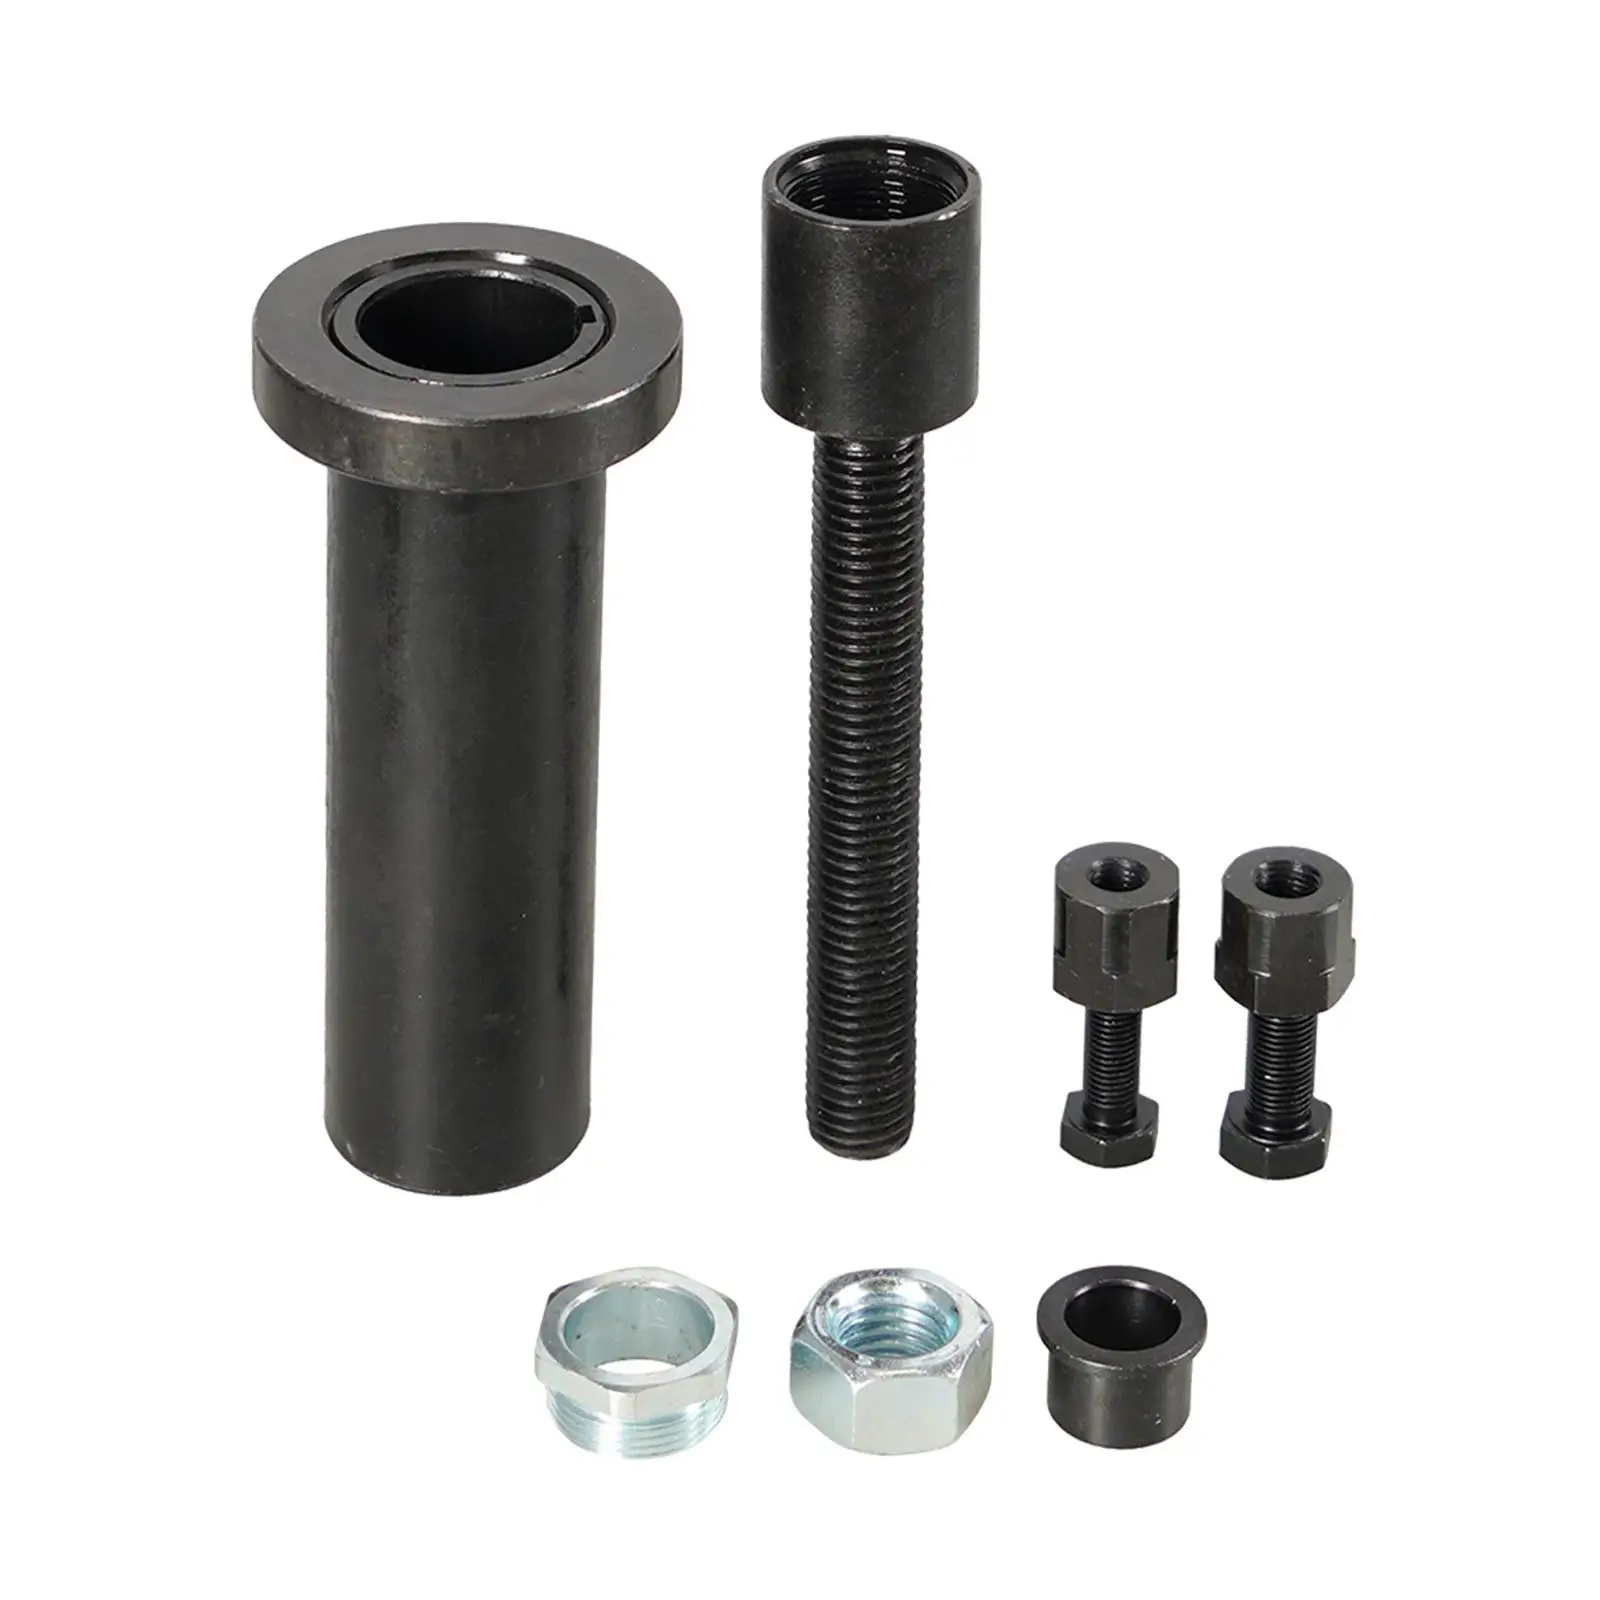 Crank Puller Installer Tool Direct Replacement Crank Pulley Tool Fit for Dirt Bike ATV Easy to Install Modified Accessories